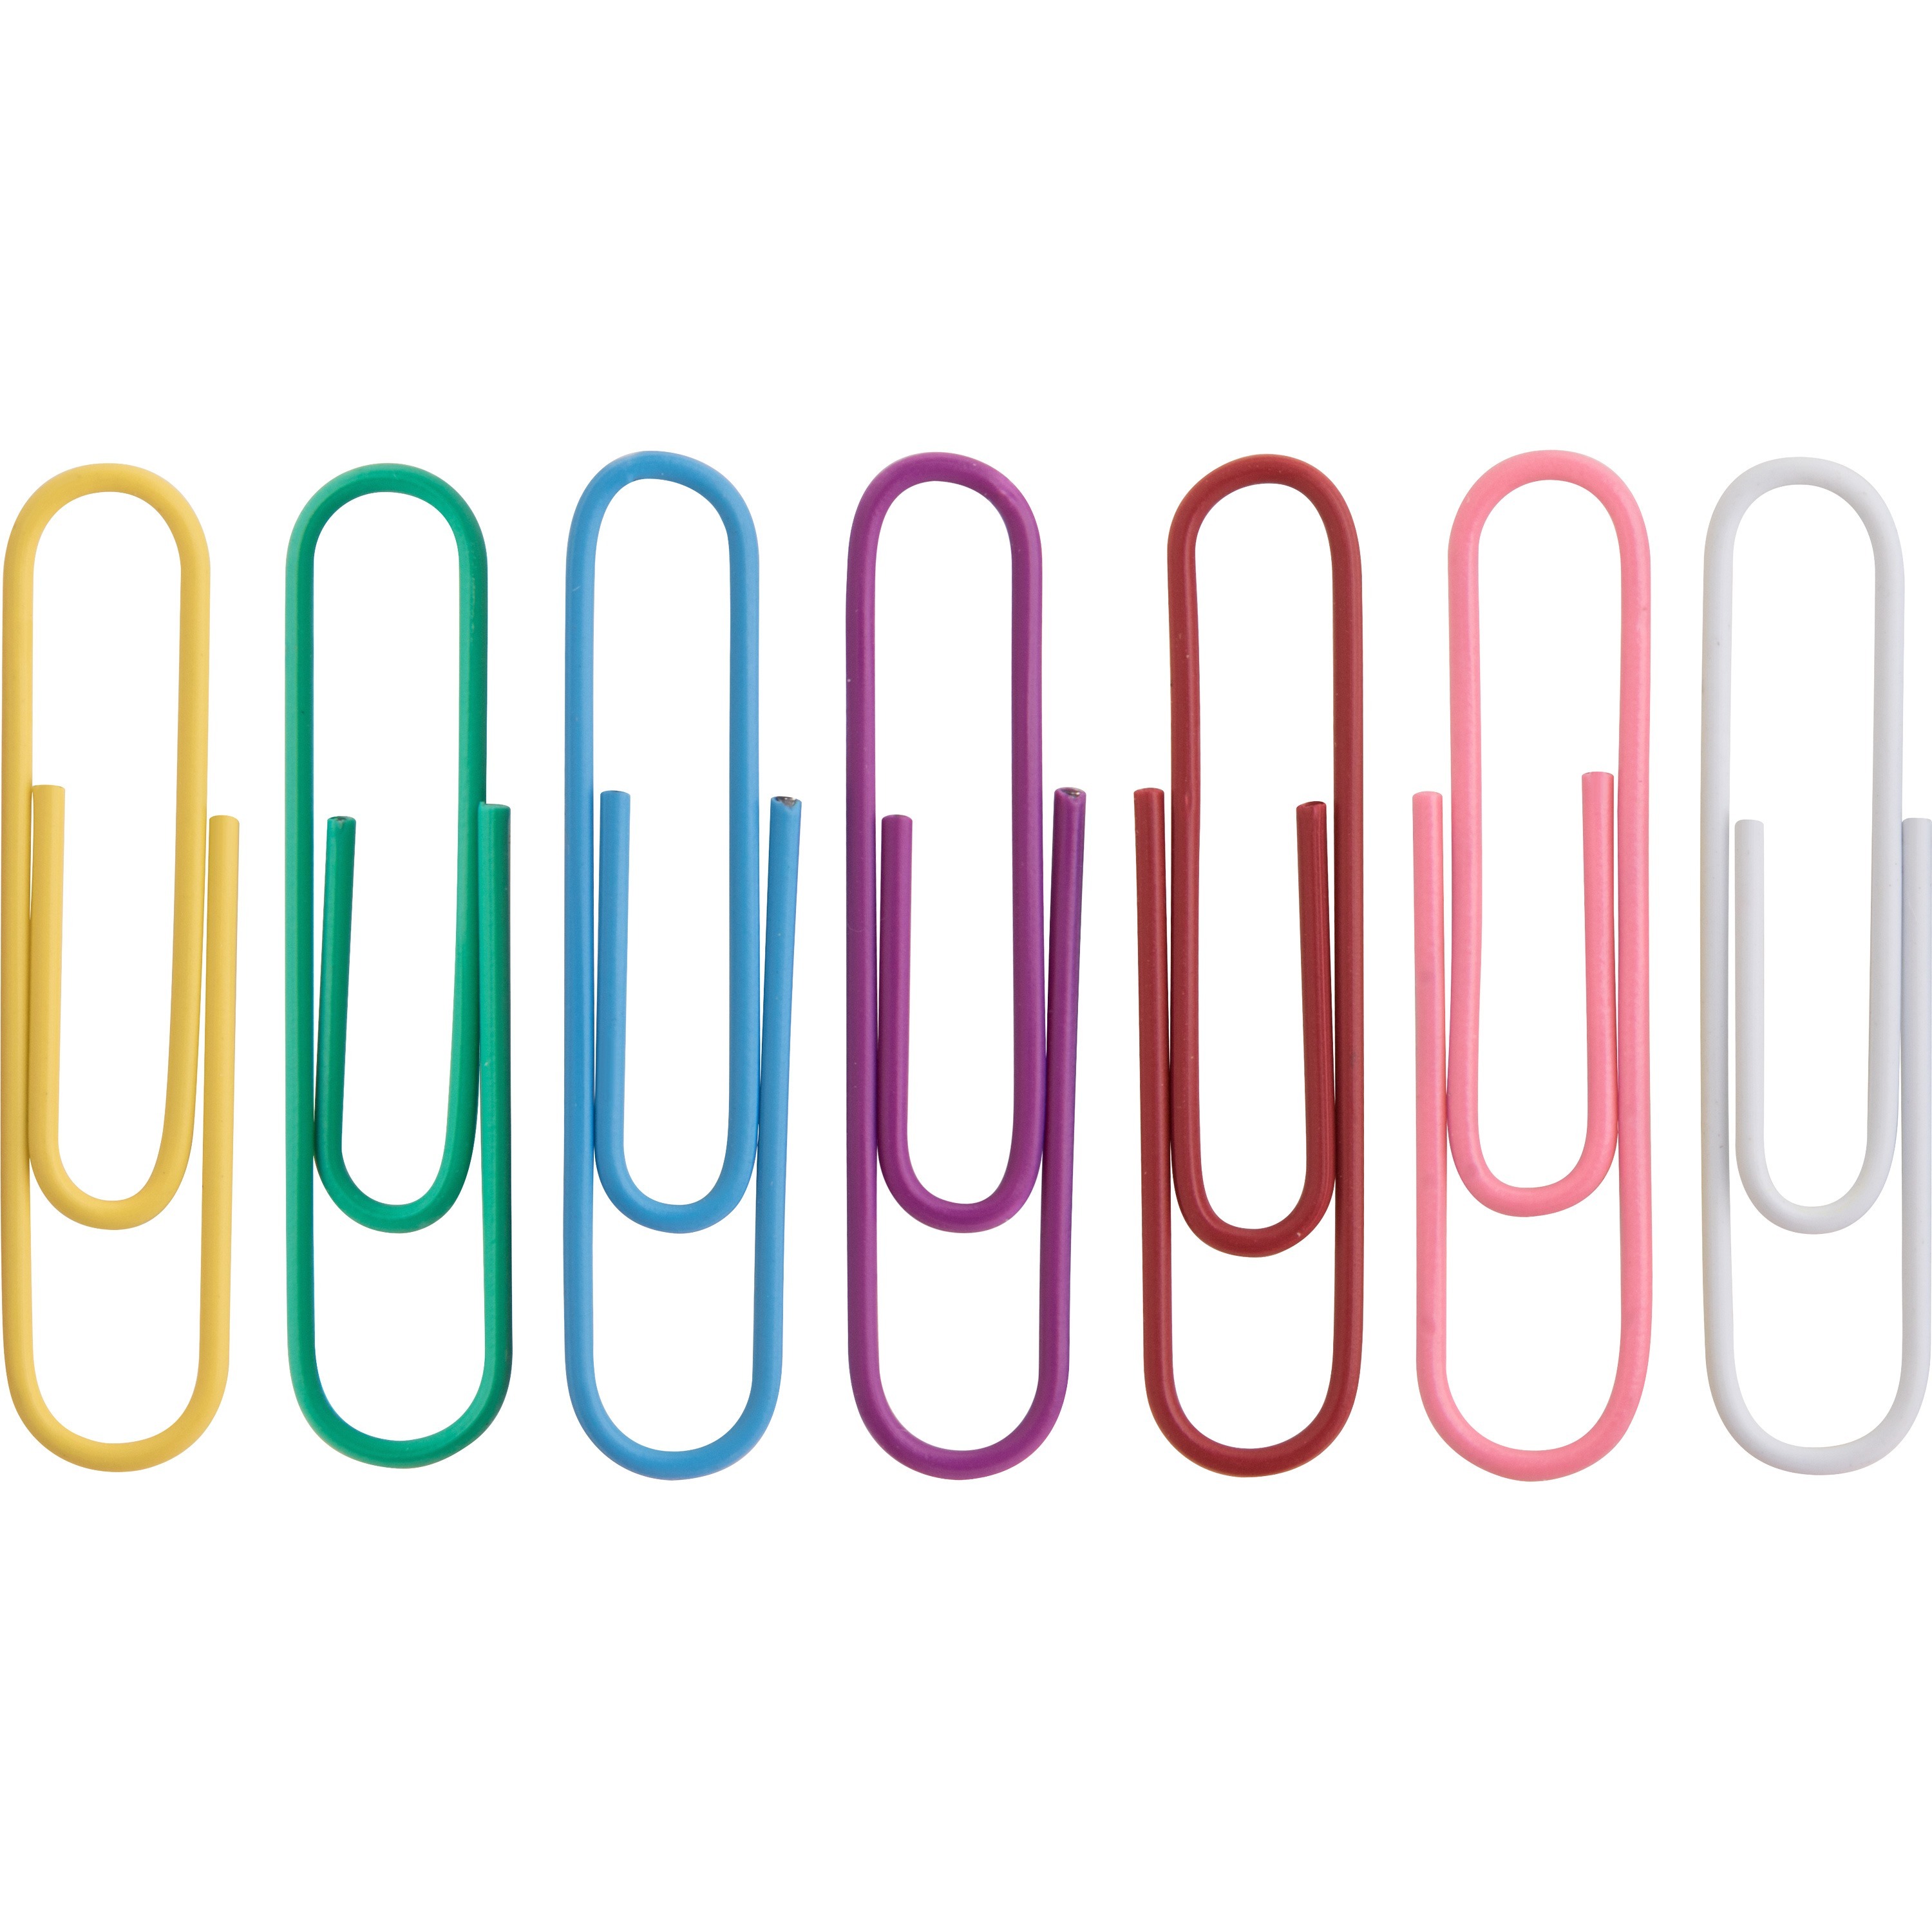 Business Source Vinyl-coated Gem Paper Clips - Small No.2 Size 500/pack